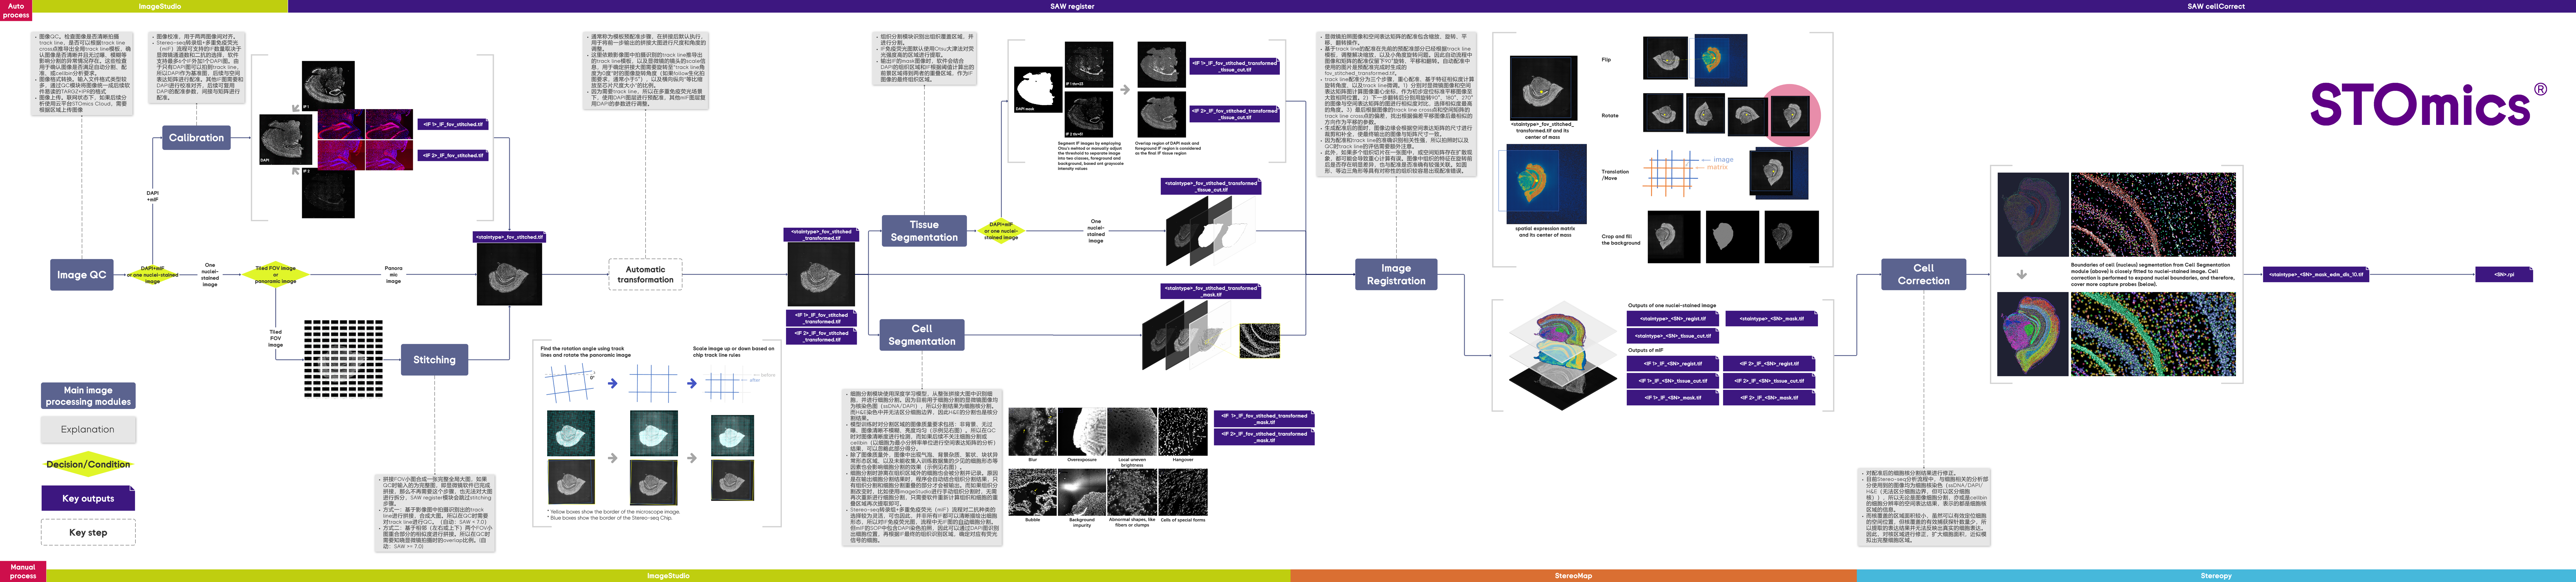 stereo-seq_image_processing_overview